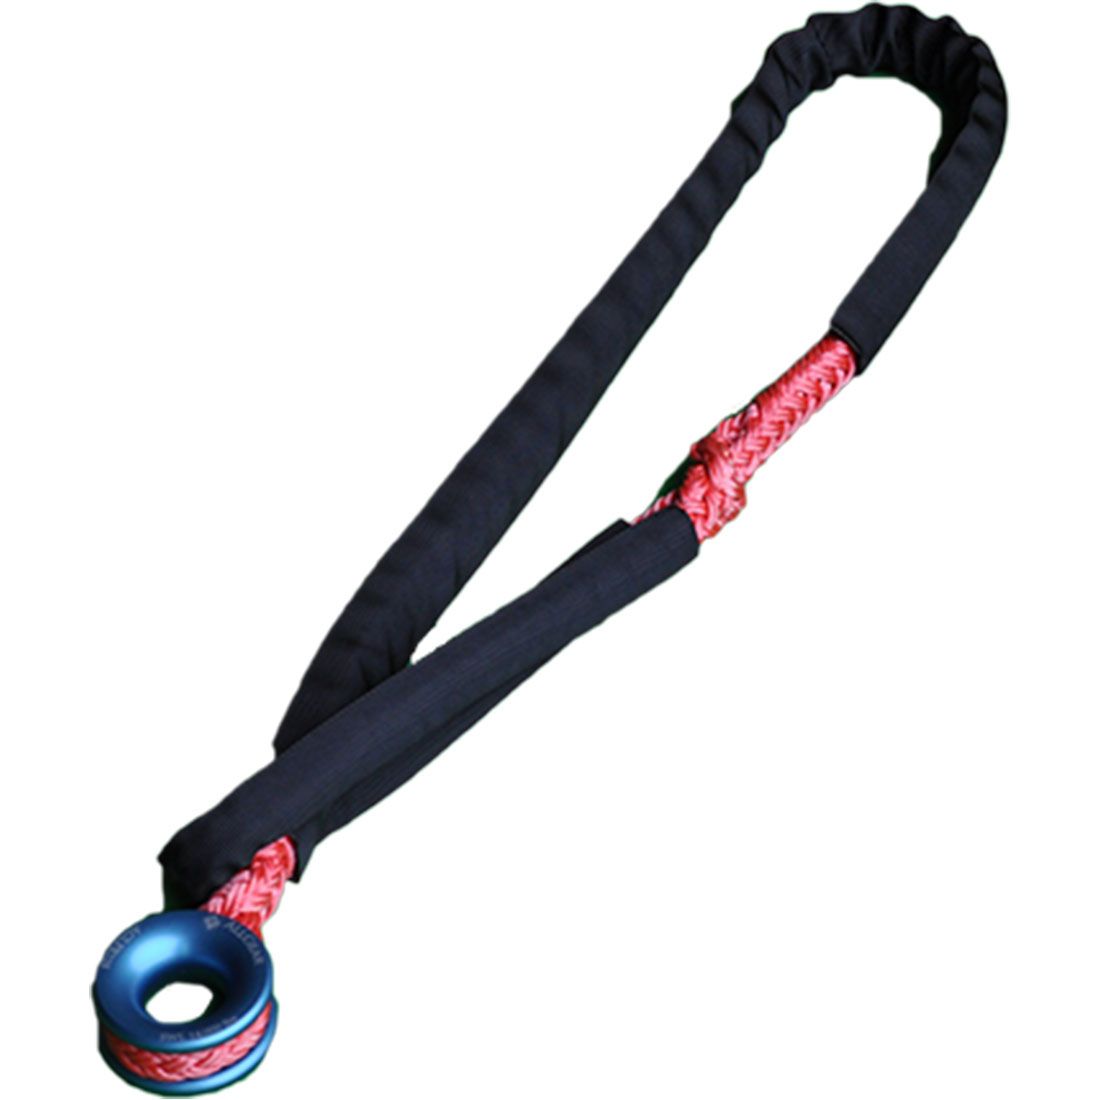 All Gear Ring Sling - AG12SPRS125